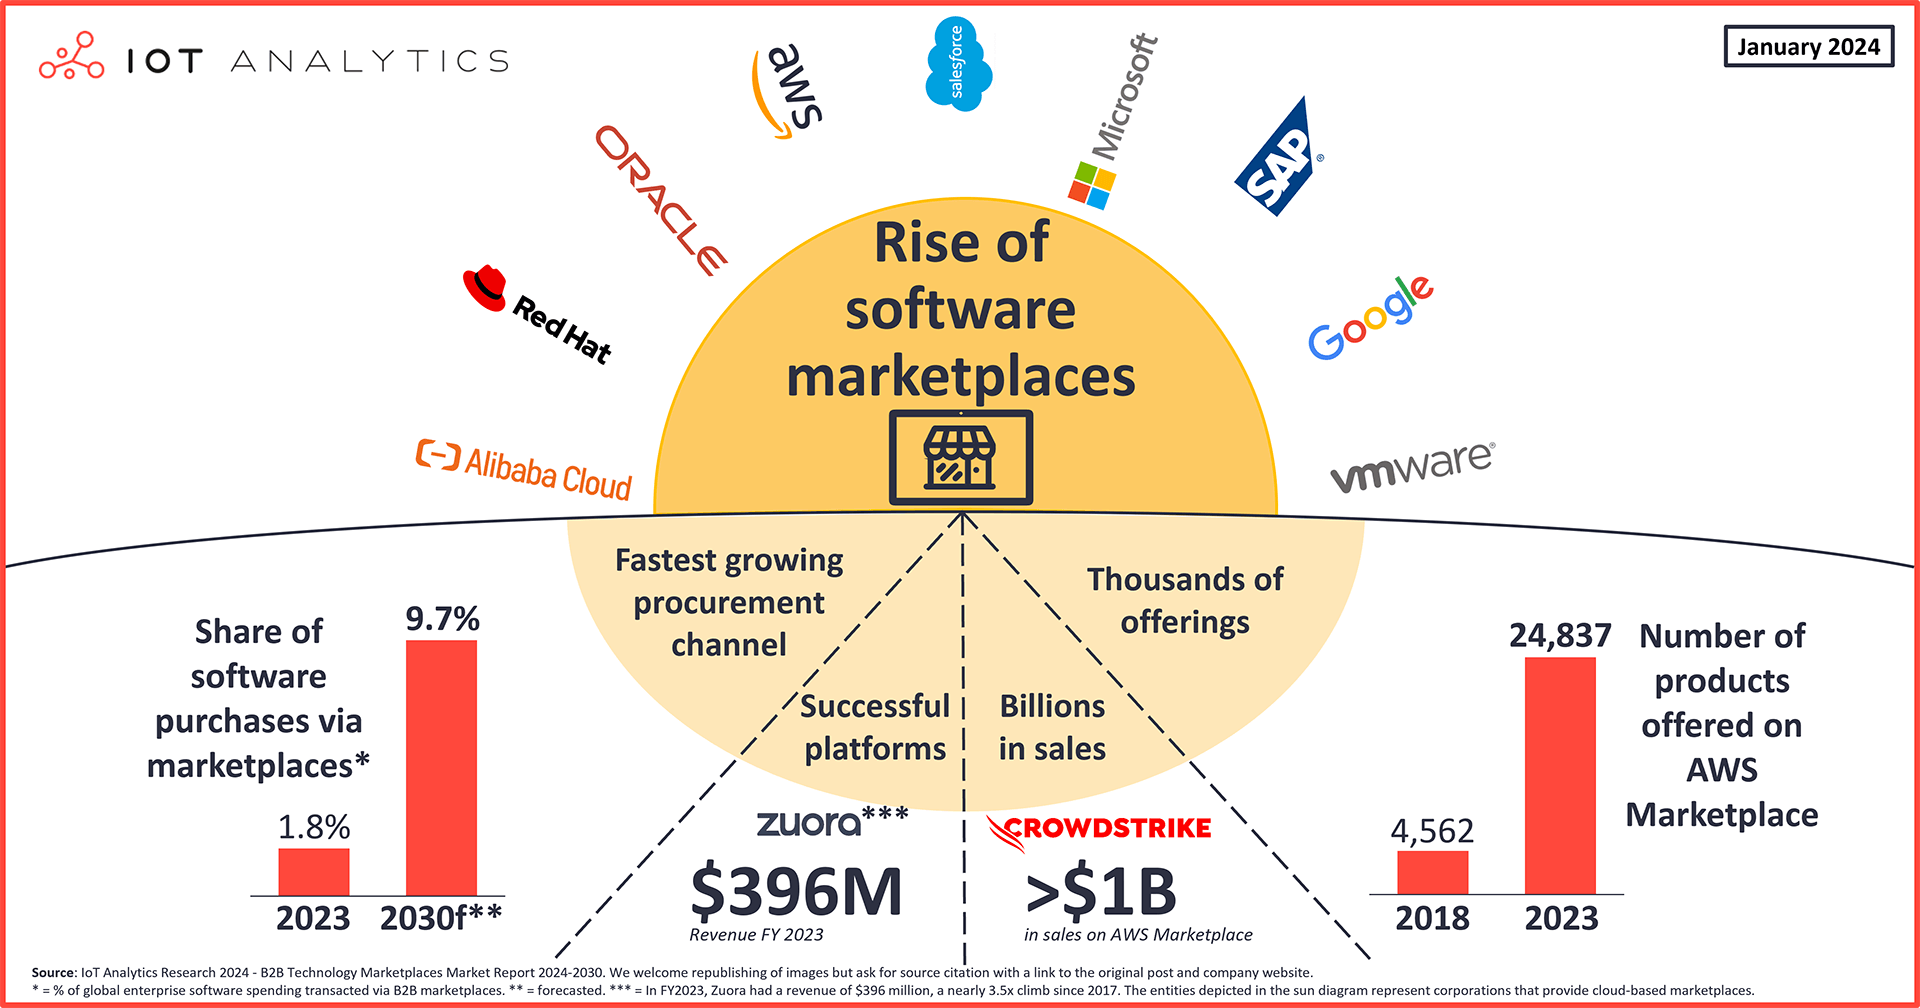 The rise of software marketplaces